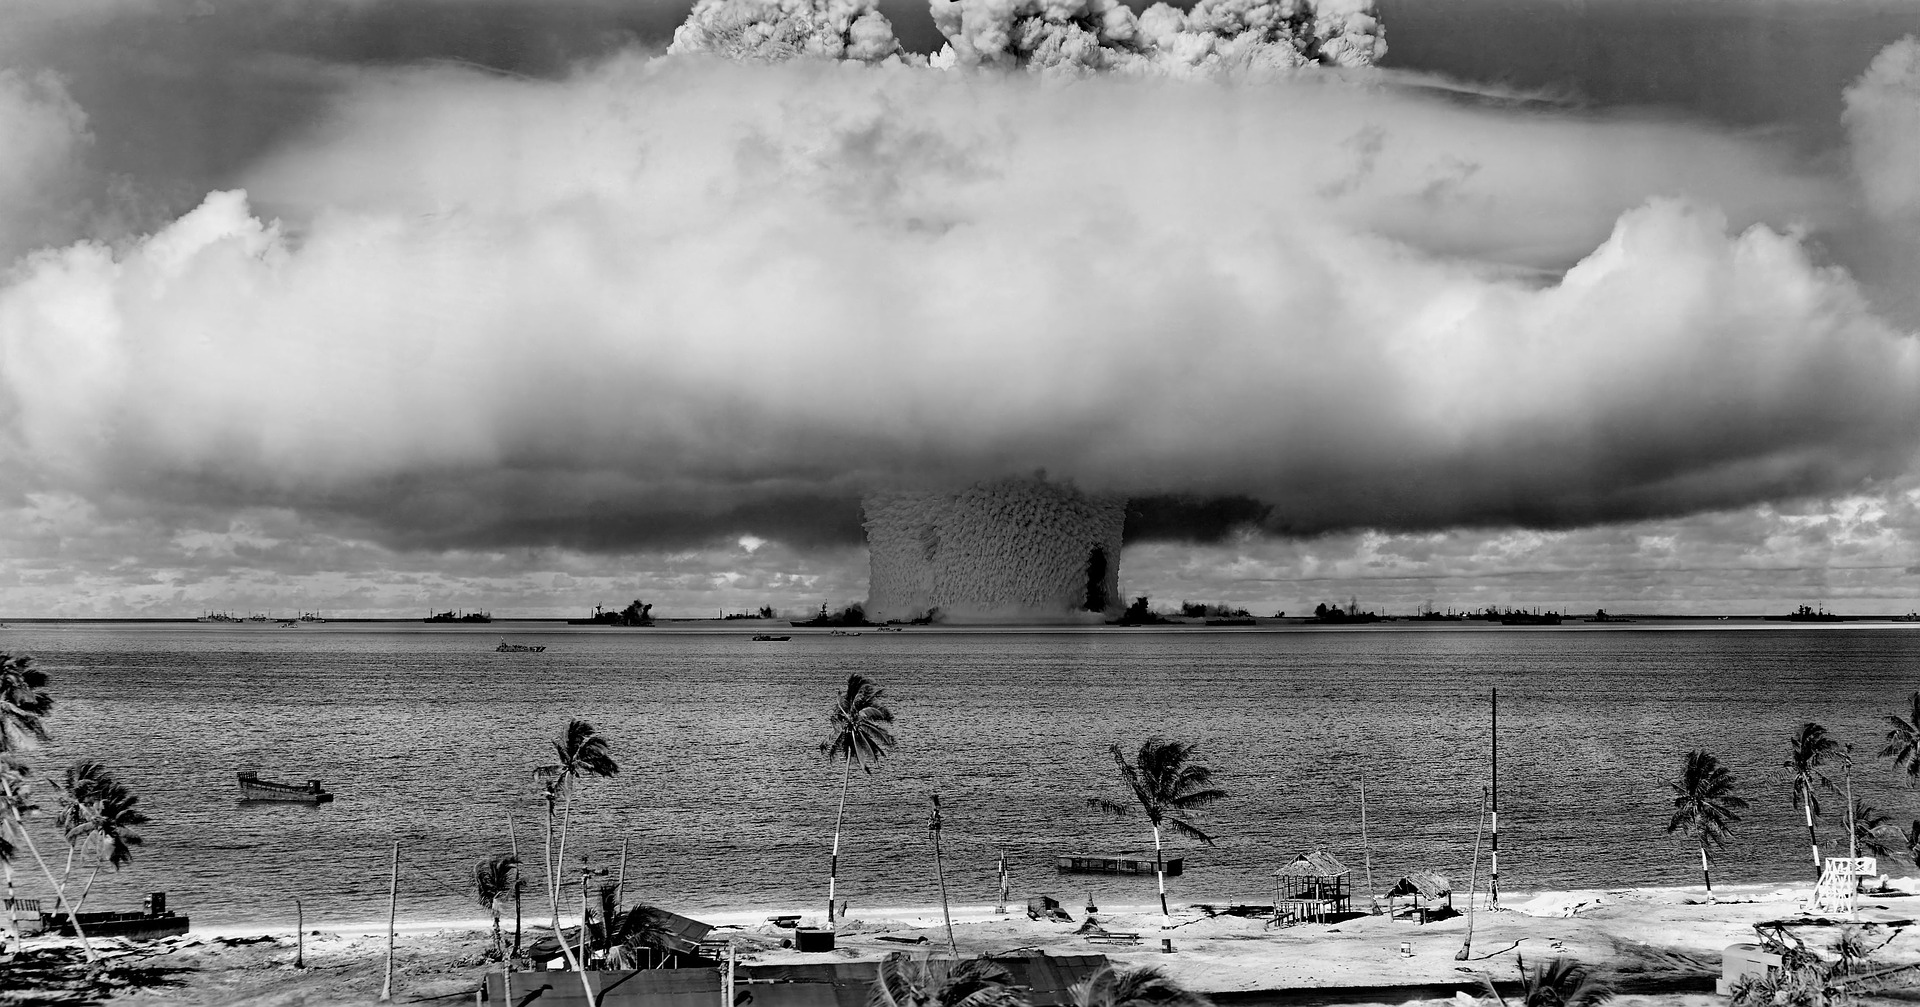 Living life in the fallout of nuclear war